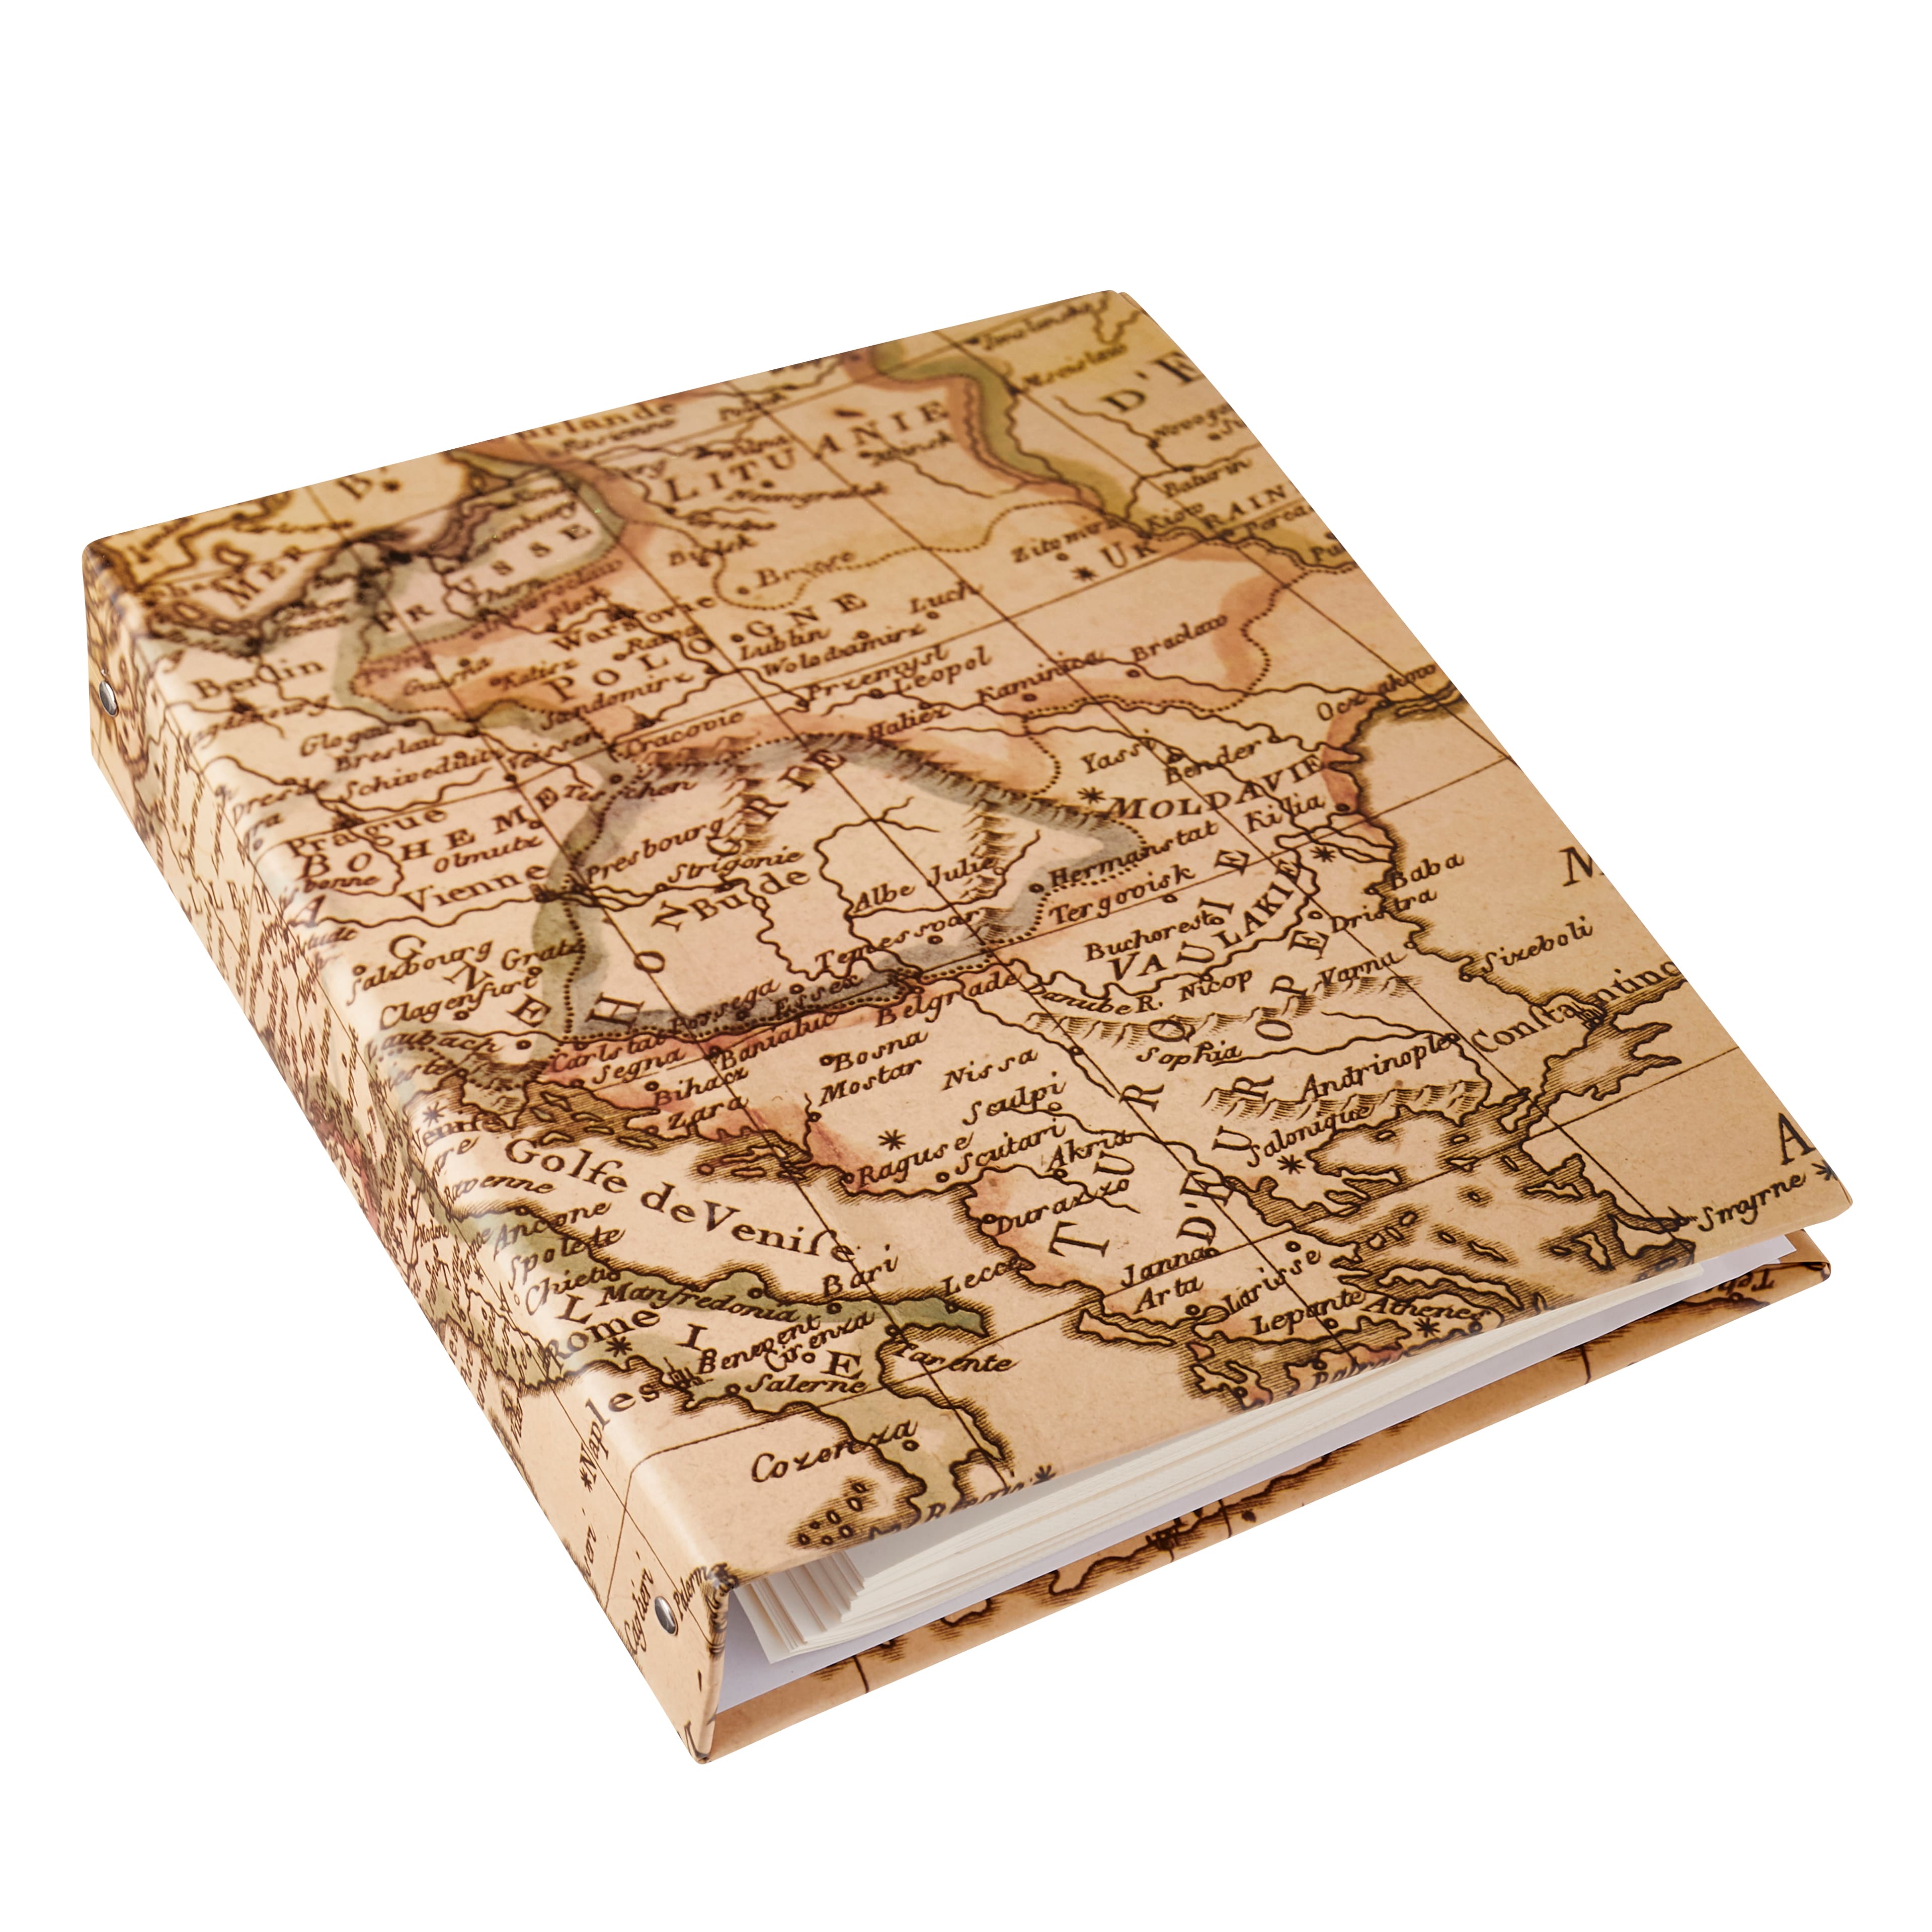 Travel Photo Album with Magnetic Pages by Recollections®